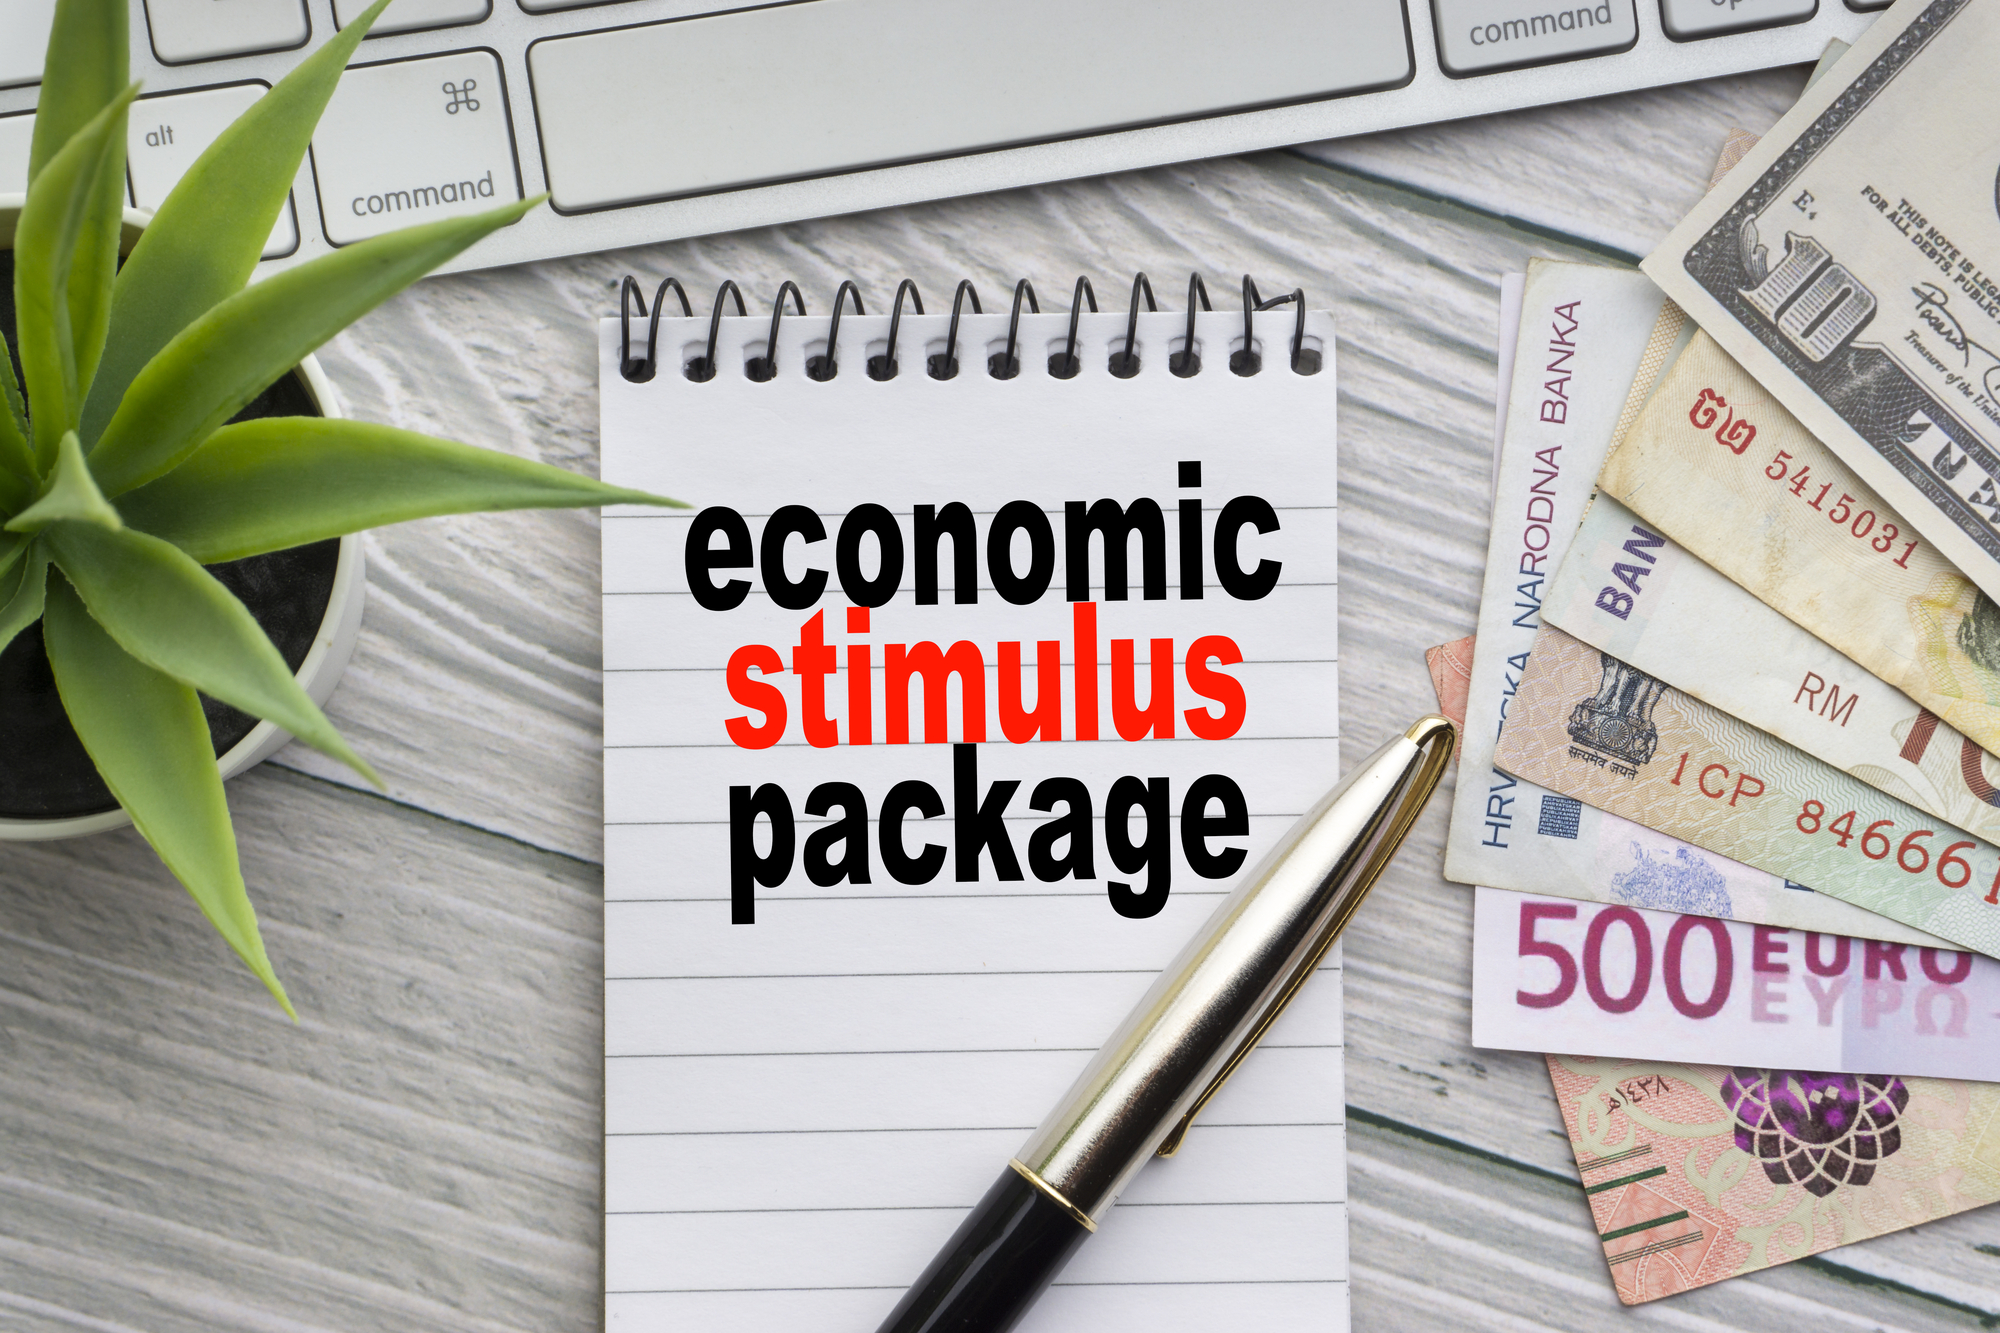 ECONOMIC STIMULUS PACKAGE text with notepad, keyboard, decorative vase, fountain pen, calculator and banknotes currency on wooden background